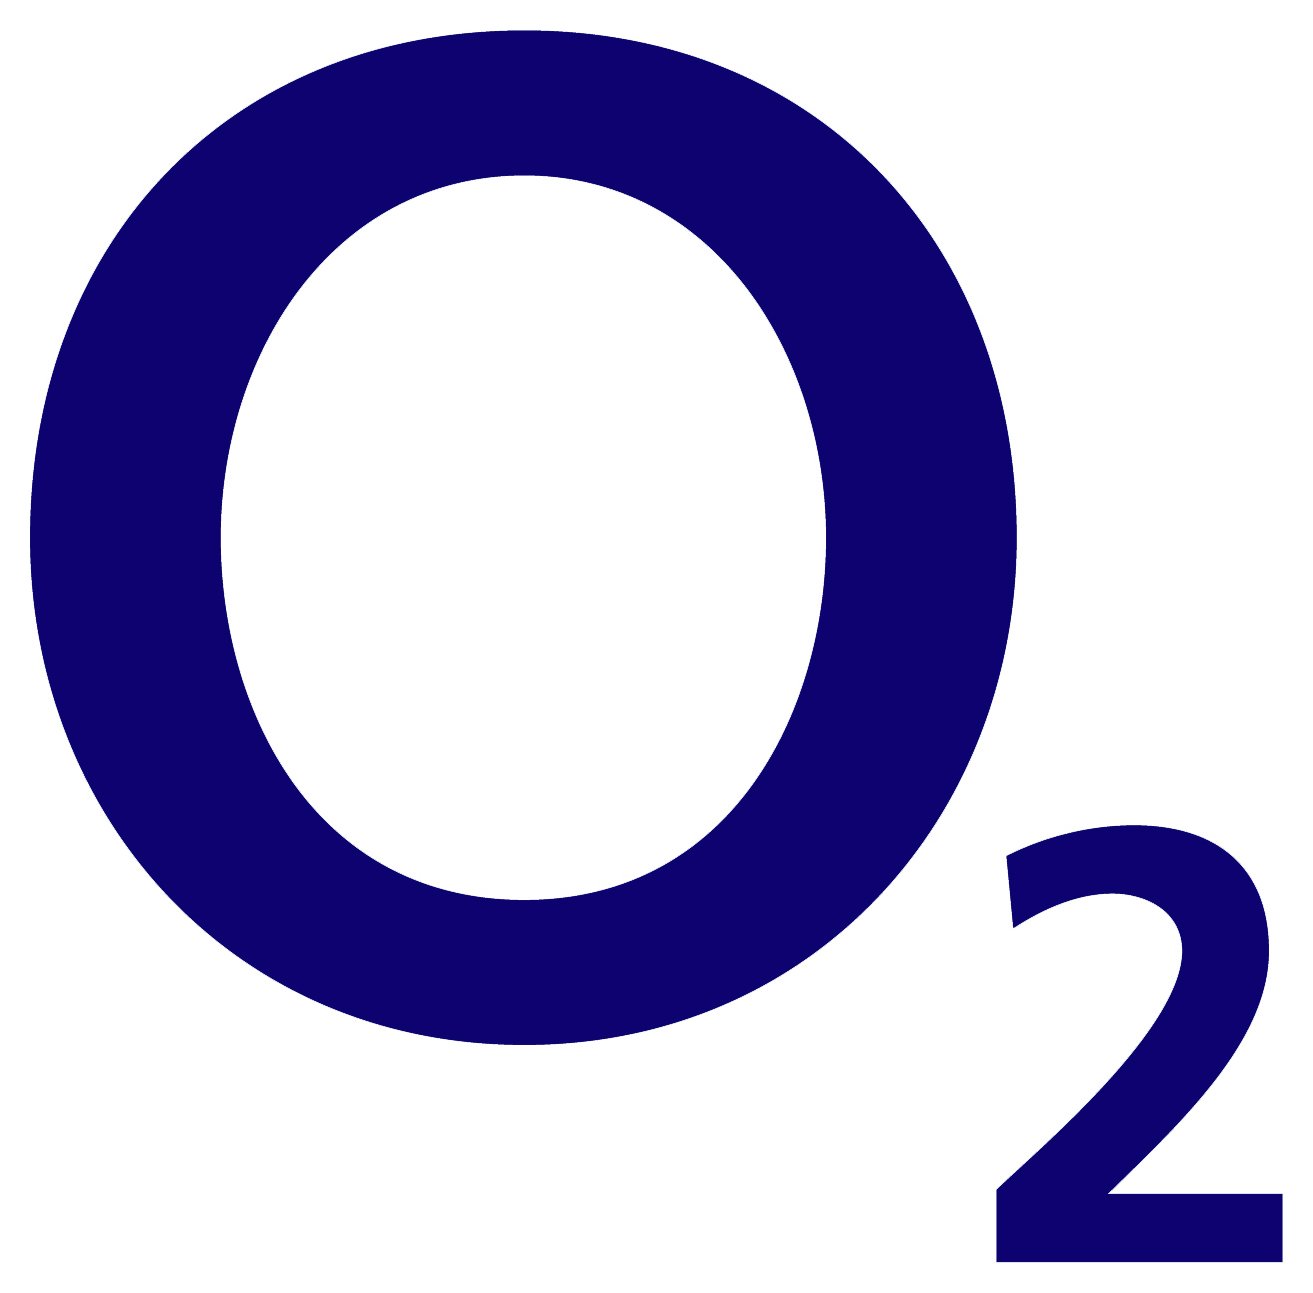 O2 å£20 Pay As You Go Mobile Top Up Voucher. Review